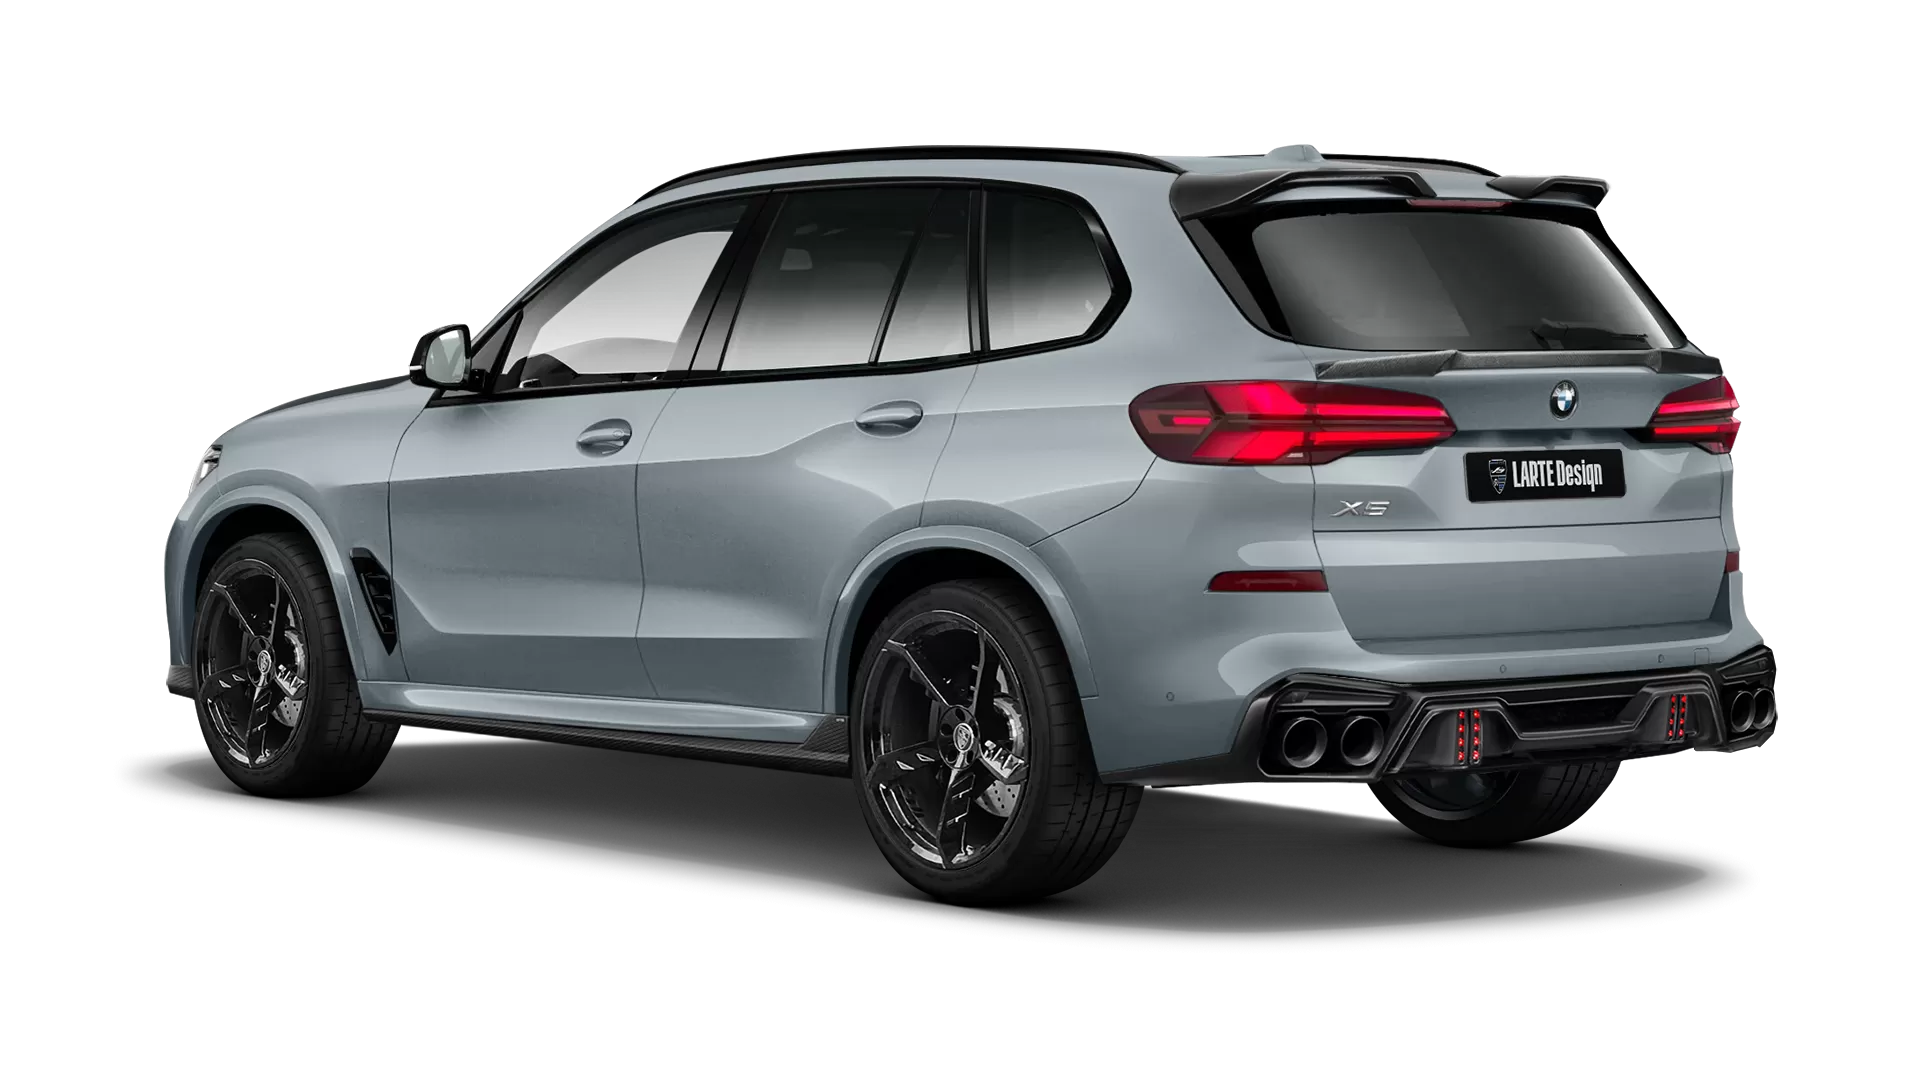 BMW X5 G05 LCI Facelift with carbon body kit: back view shown in Frozen Pure Grey